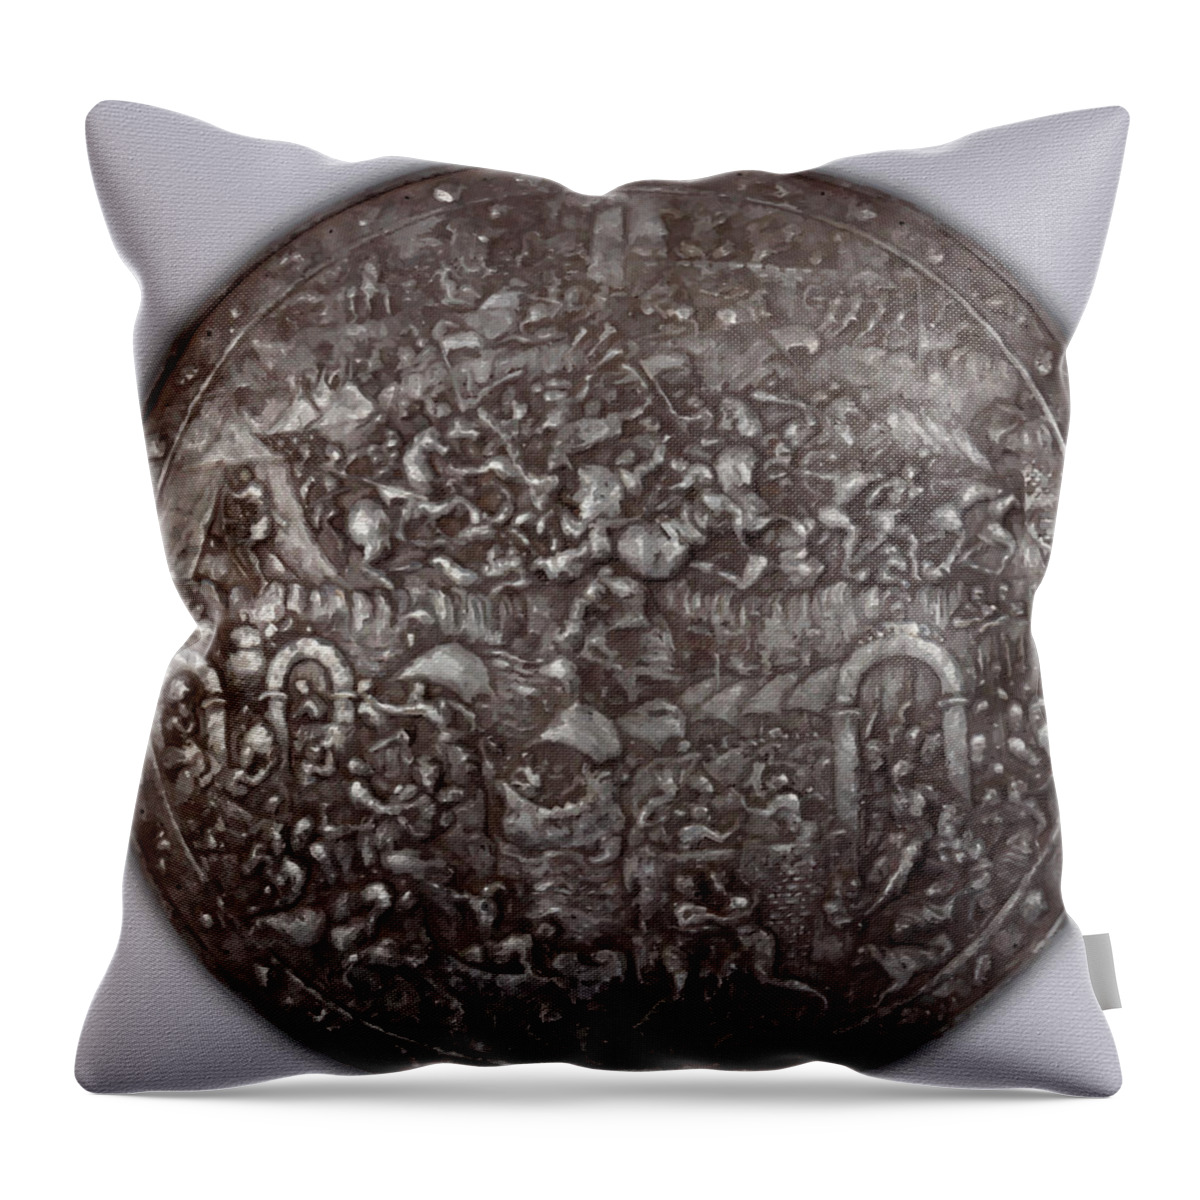 Armor Throw Pillow featuring the painting Armor Study Shield 1 by Tony Rubino